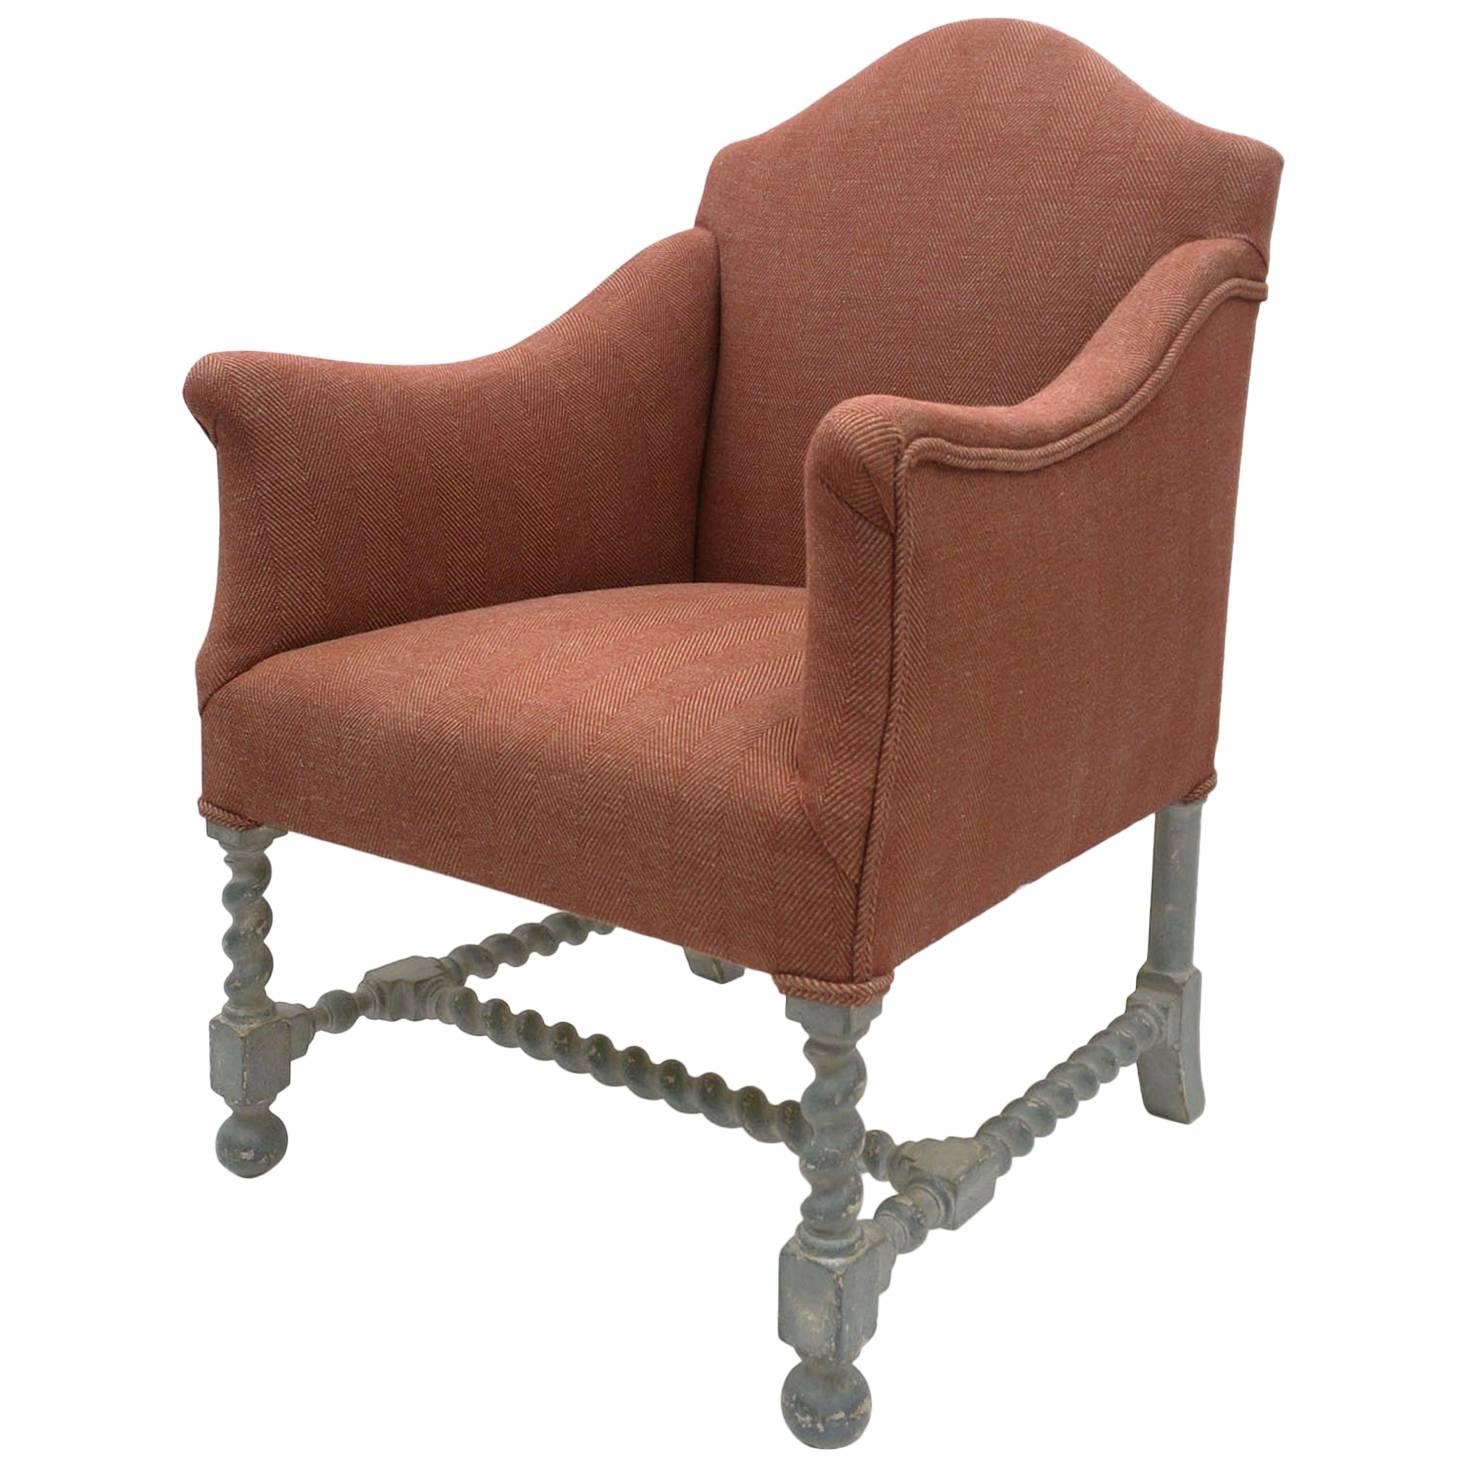 Early 20th Century French Single Upholstered Armchair with Curved Back